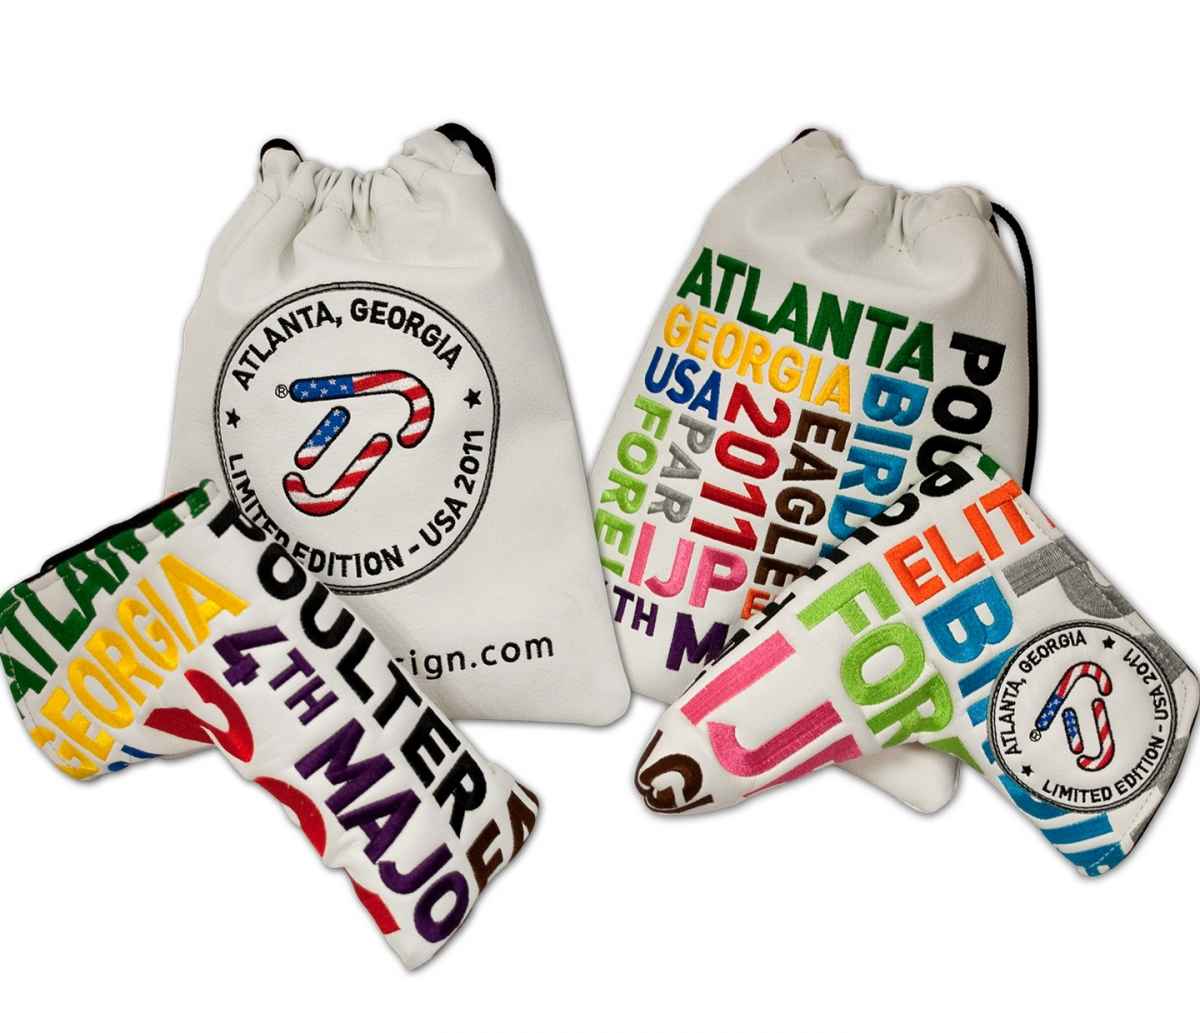 Poulter launches US PGA putter cover